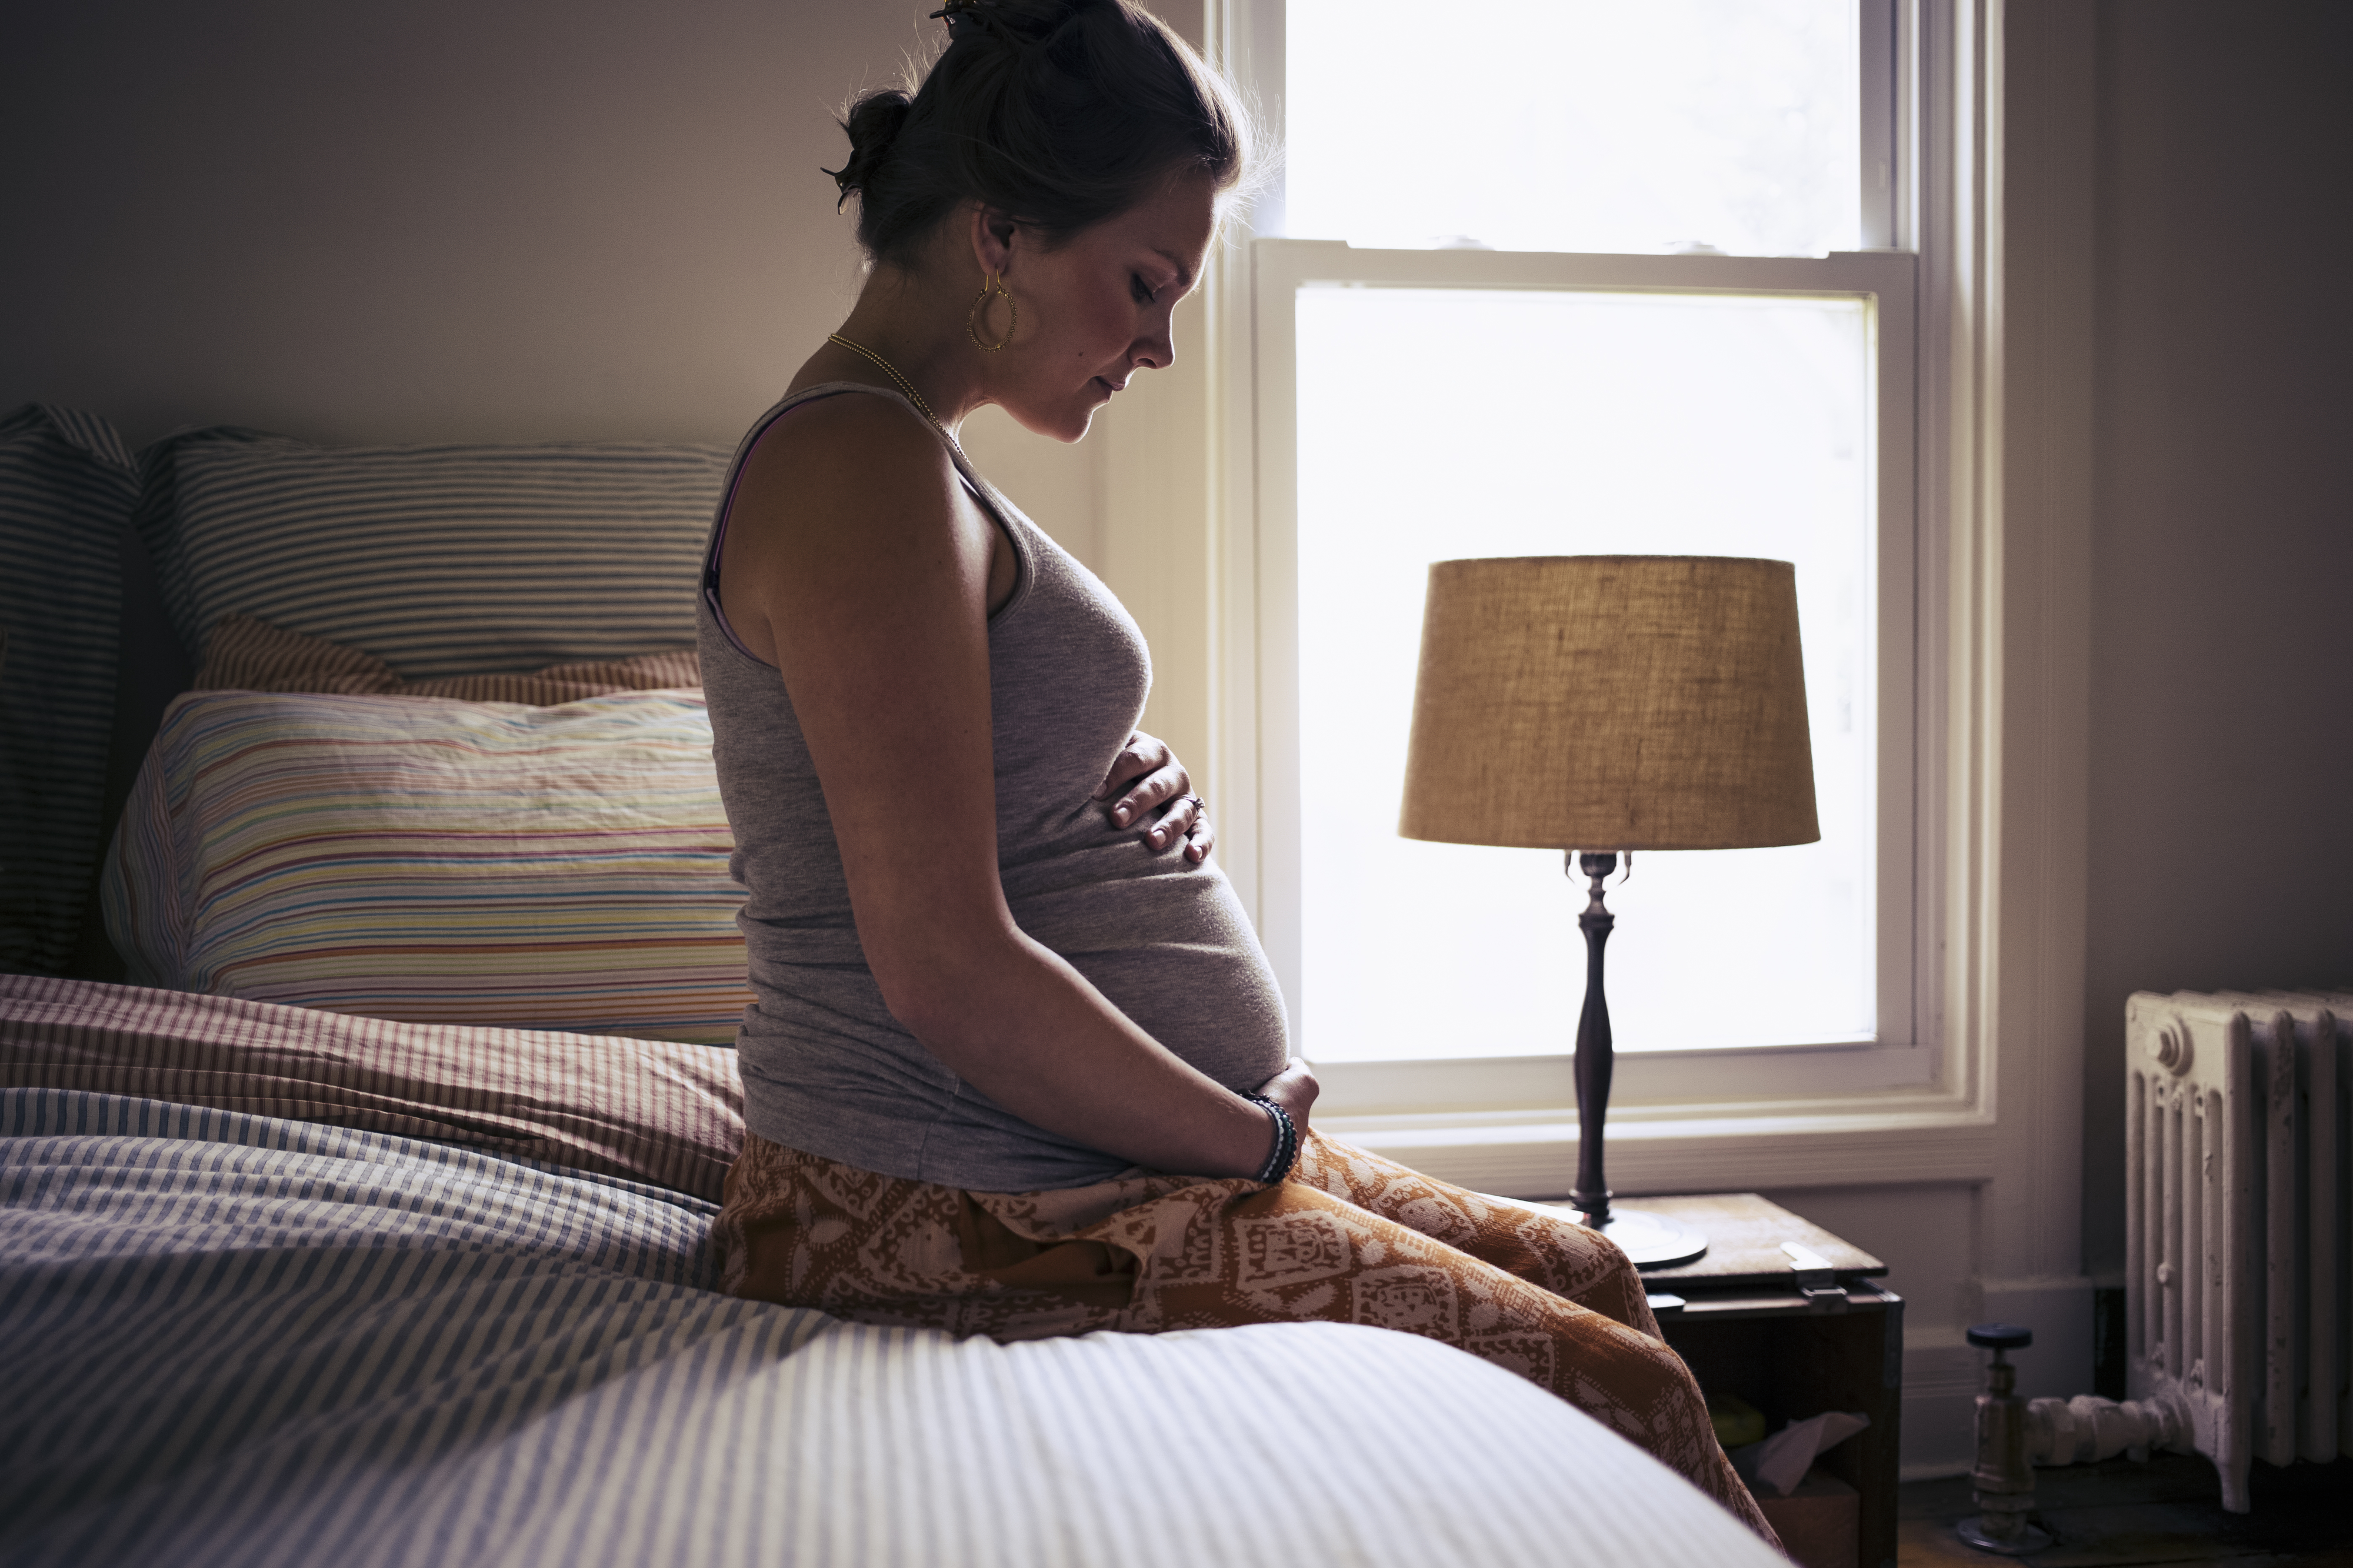 Pregnant woman sitting on bed in profile, hands on belly, with peaceful expression, in a bedroom setting